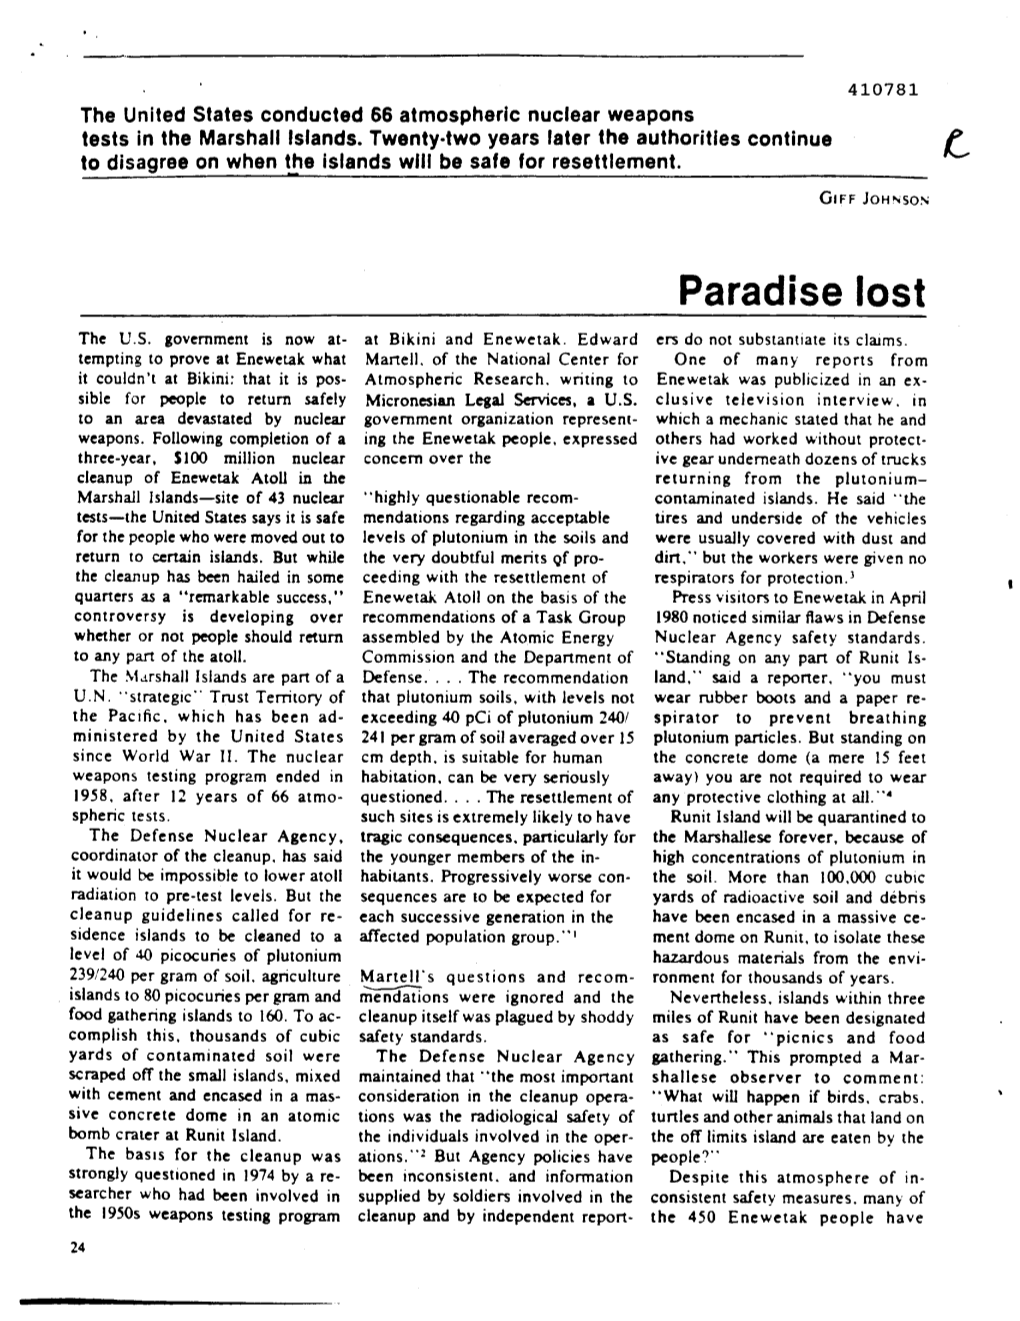 The Bulletin of the Atomic Scientists, Dec. 1980